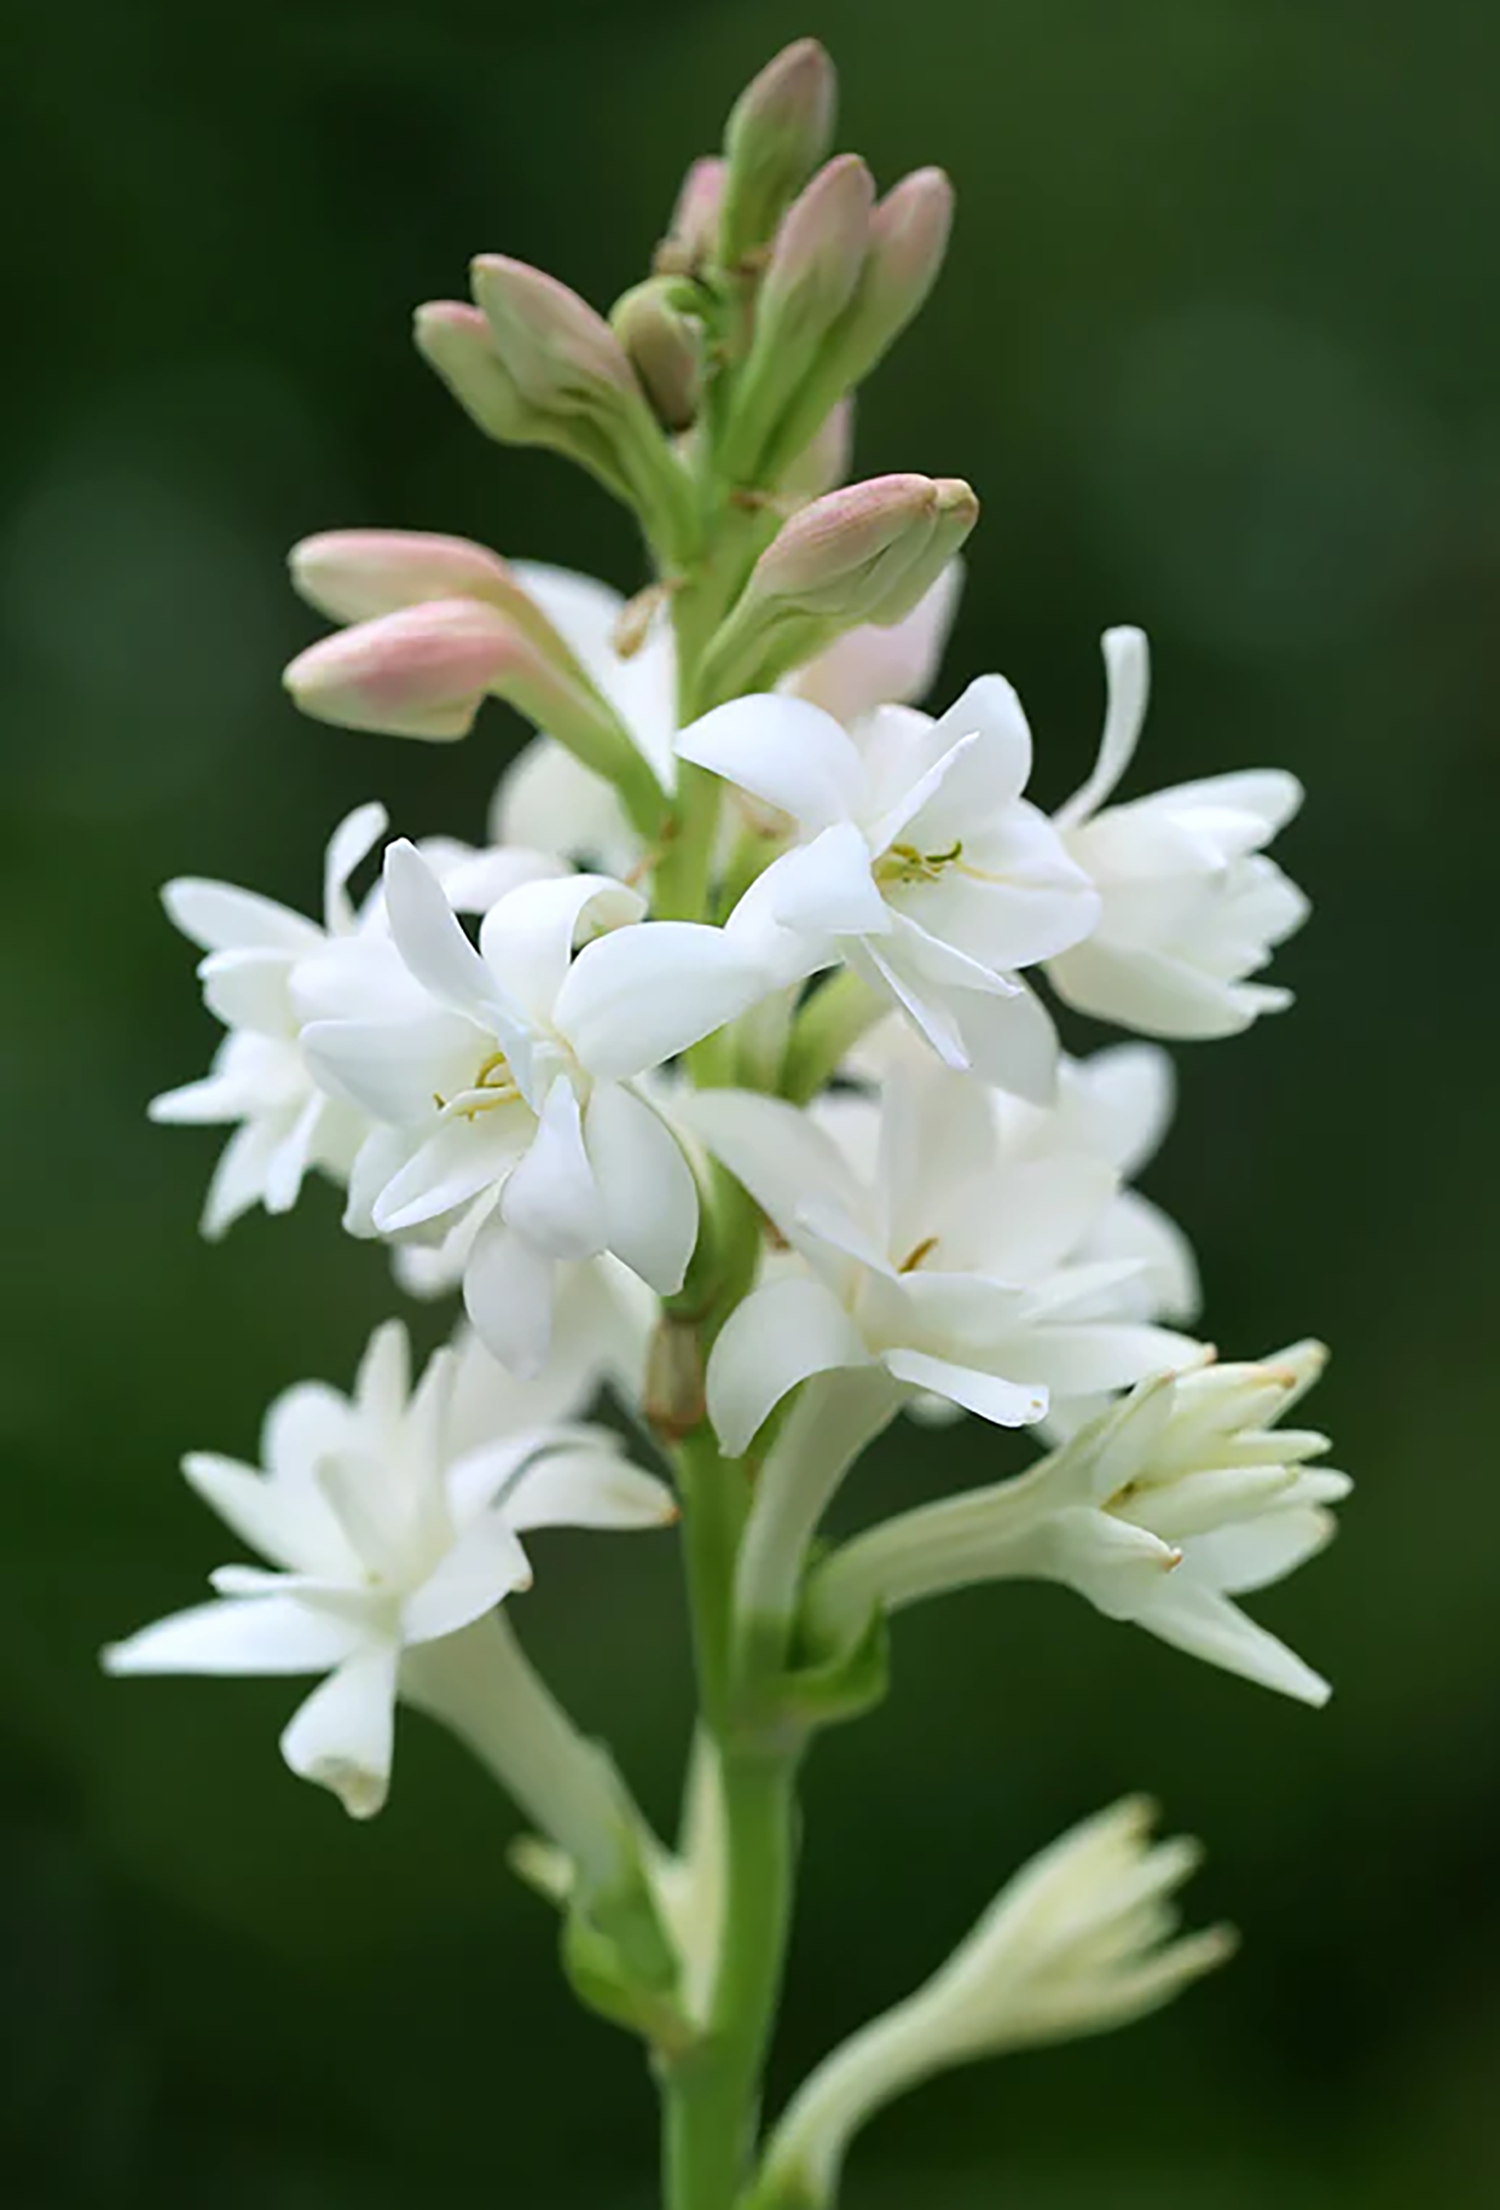 Tuberose Absolute for Natural Perfumery